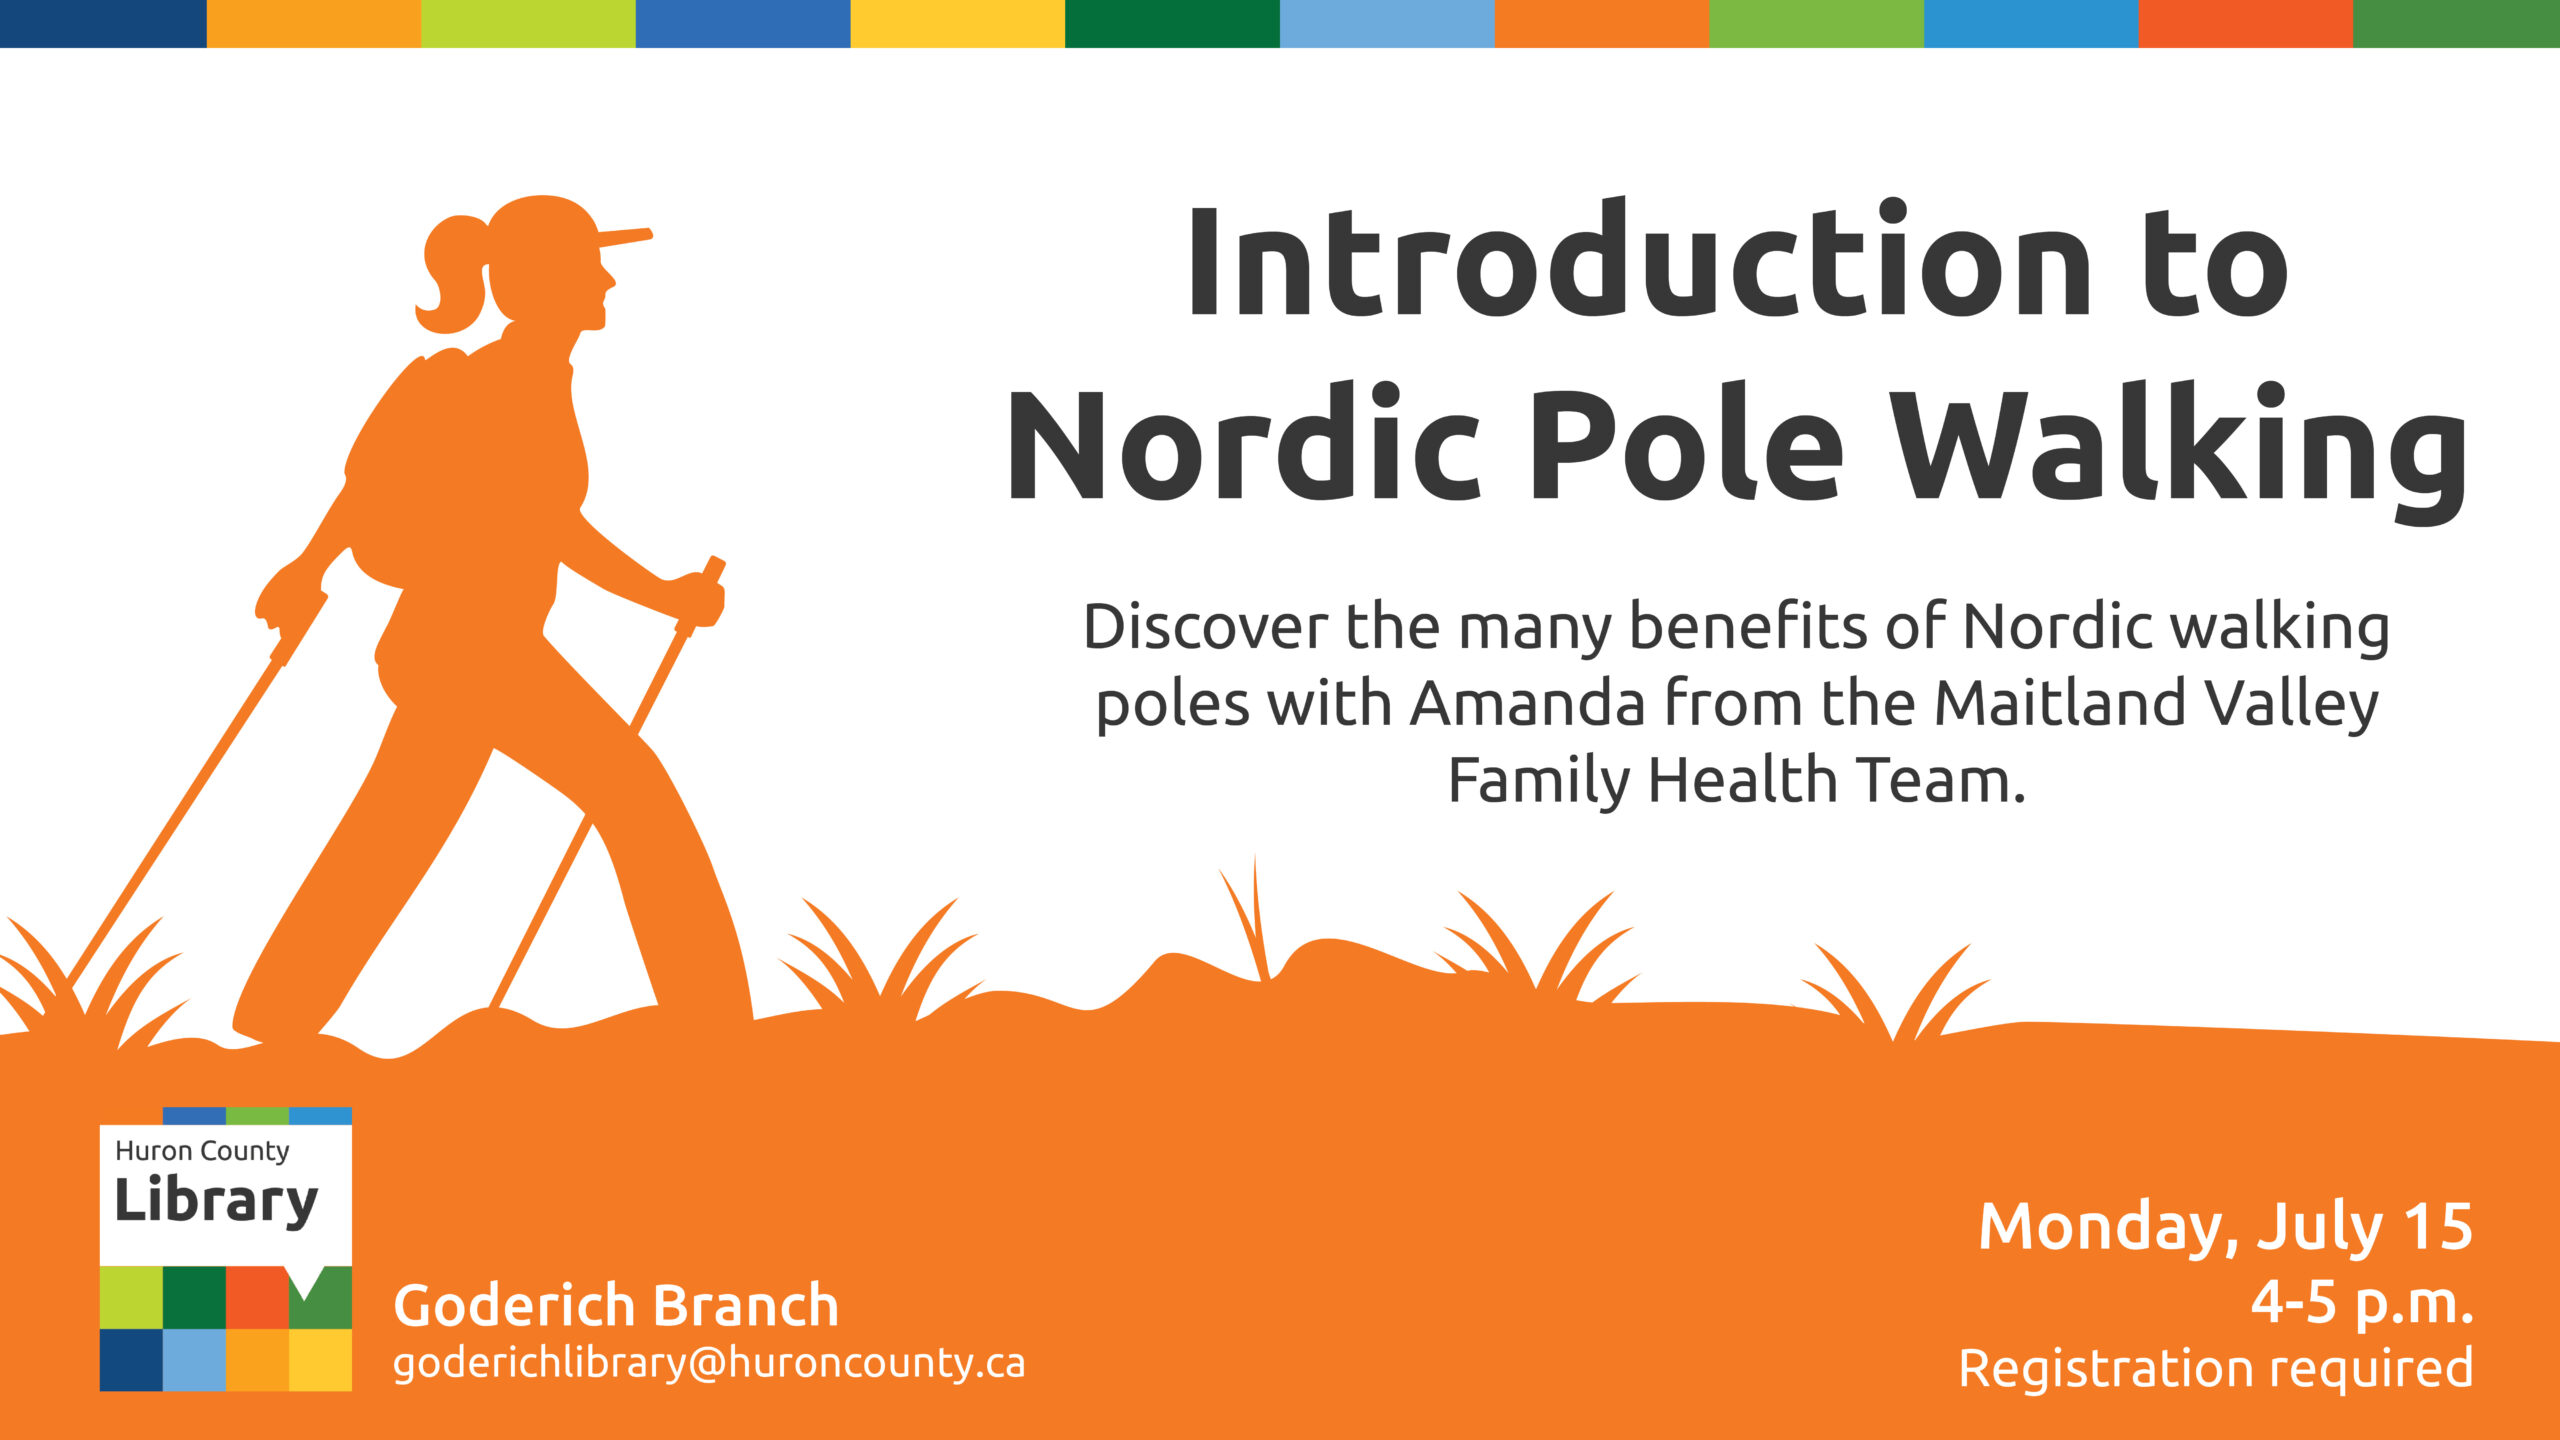 Illustration of a person walking with nordic poles with text promoting introduction program at Goderich